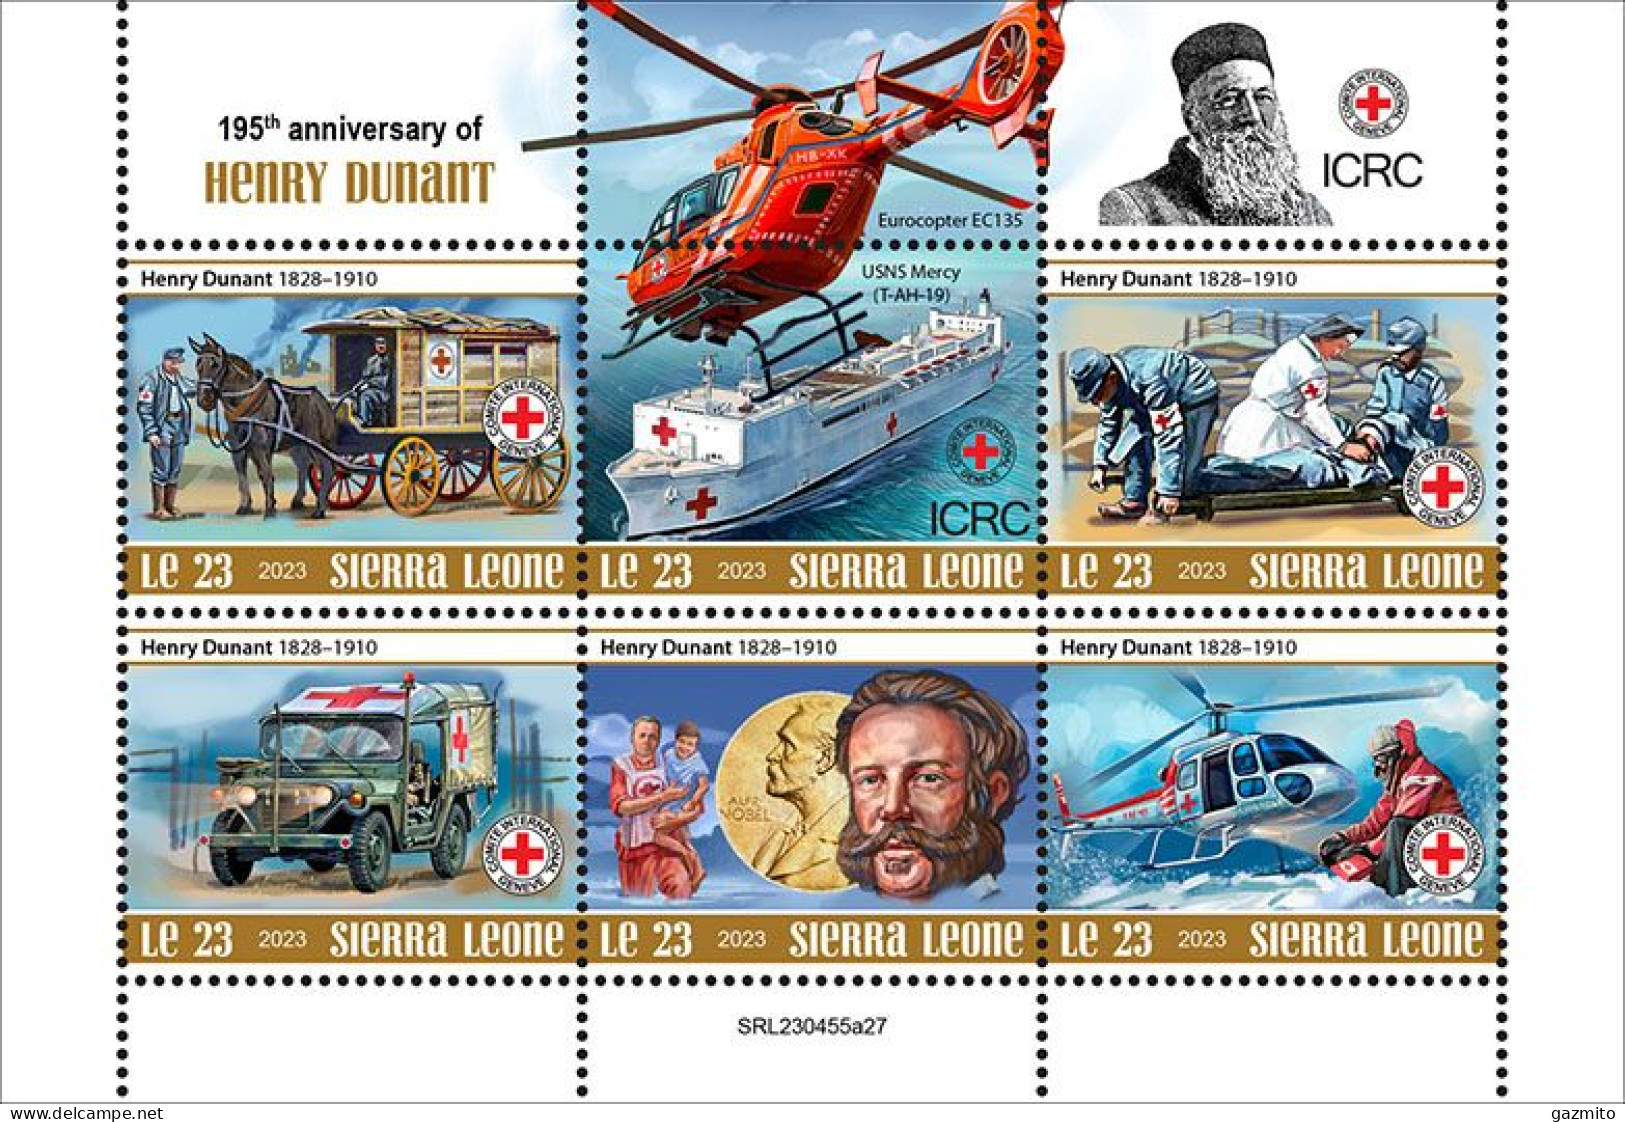 Sierra Leone 2023, Dunant, Car, Helicopter, Carriage, 6val In BF - Red Cross